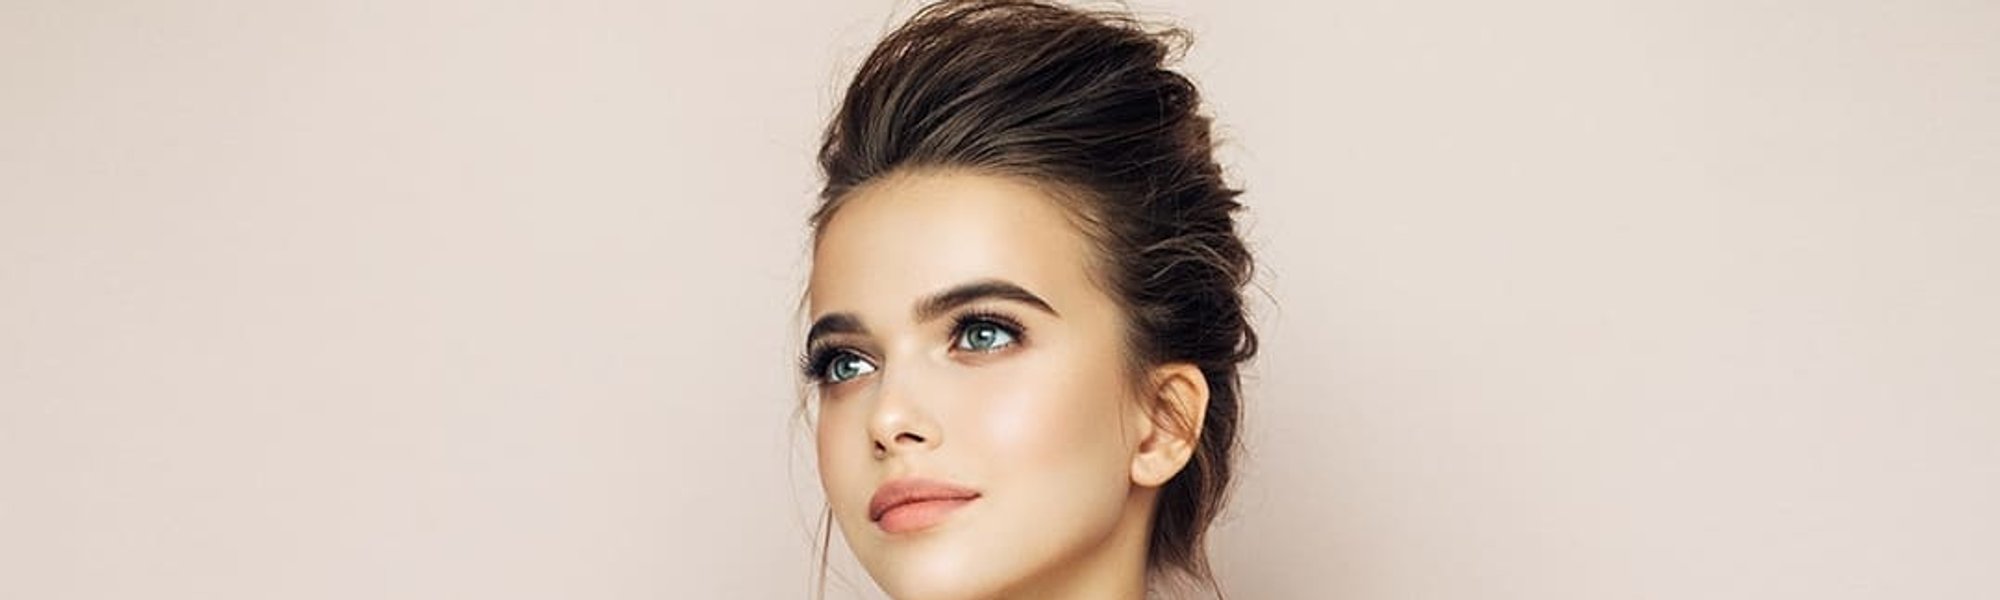 The Most Popular Updos Of 2019 1080x476